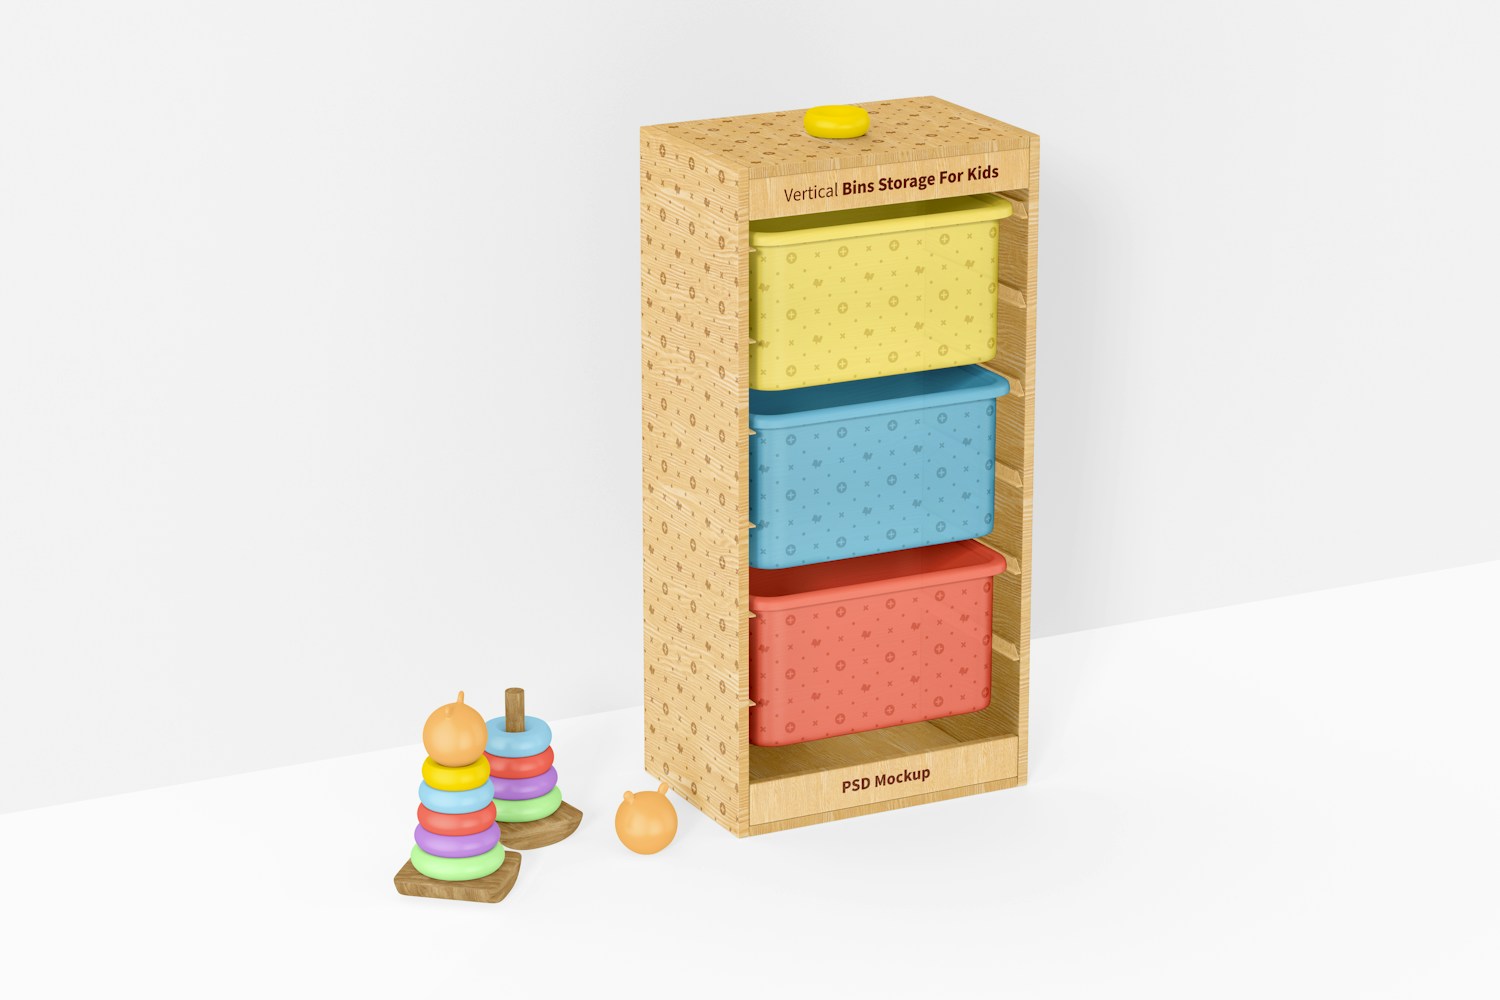 Vertical Bins Storage for Kids with Wall Mockup